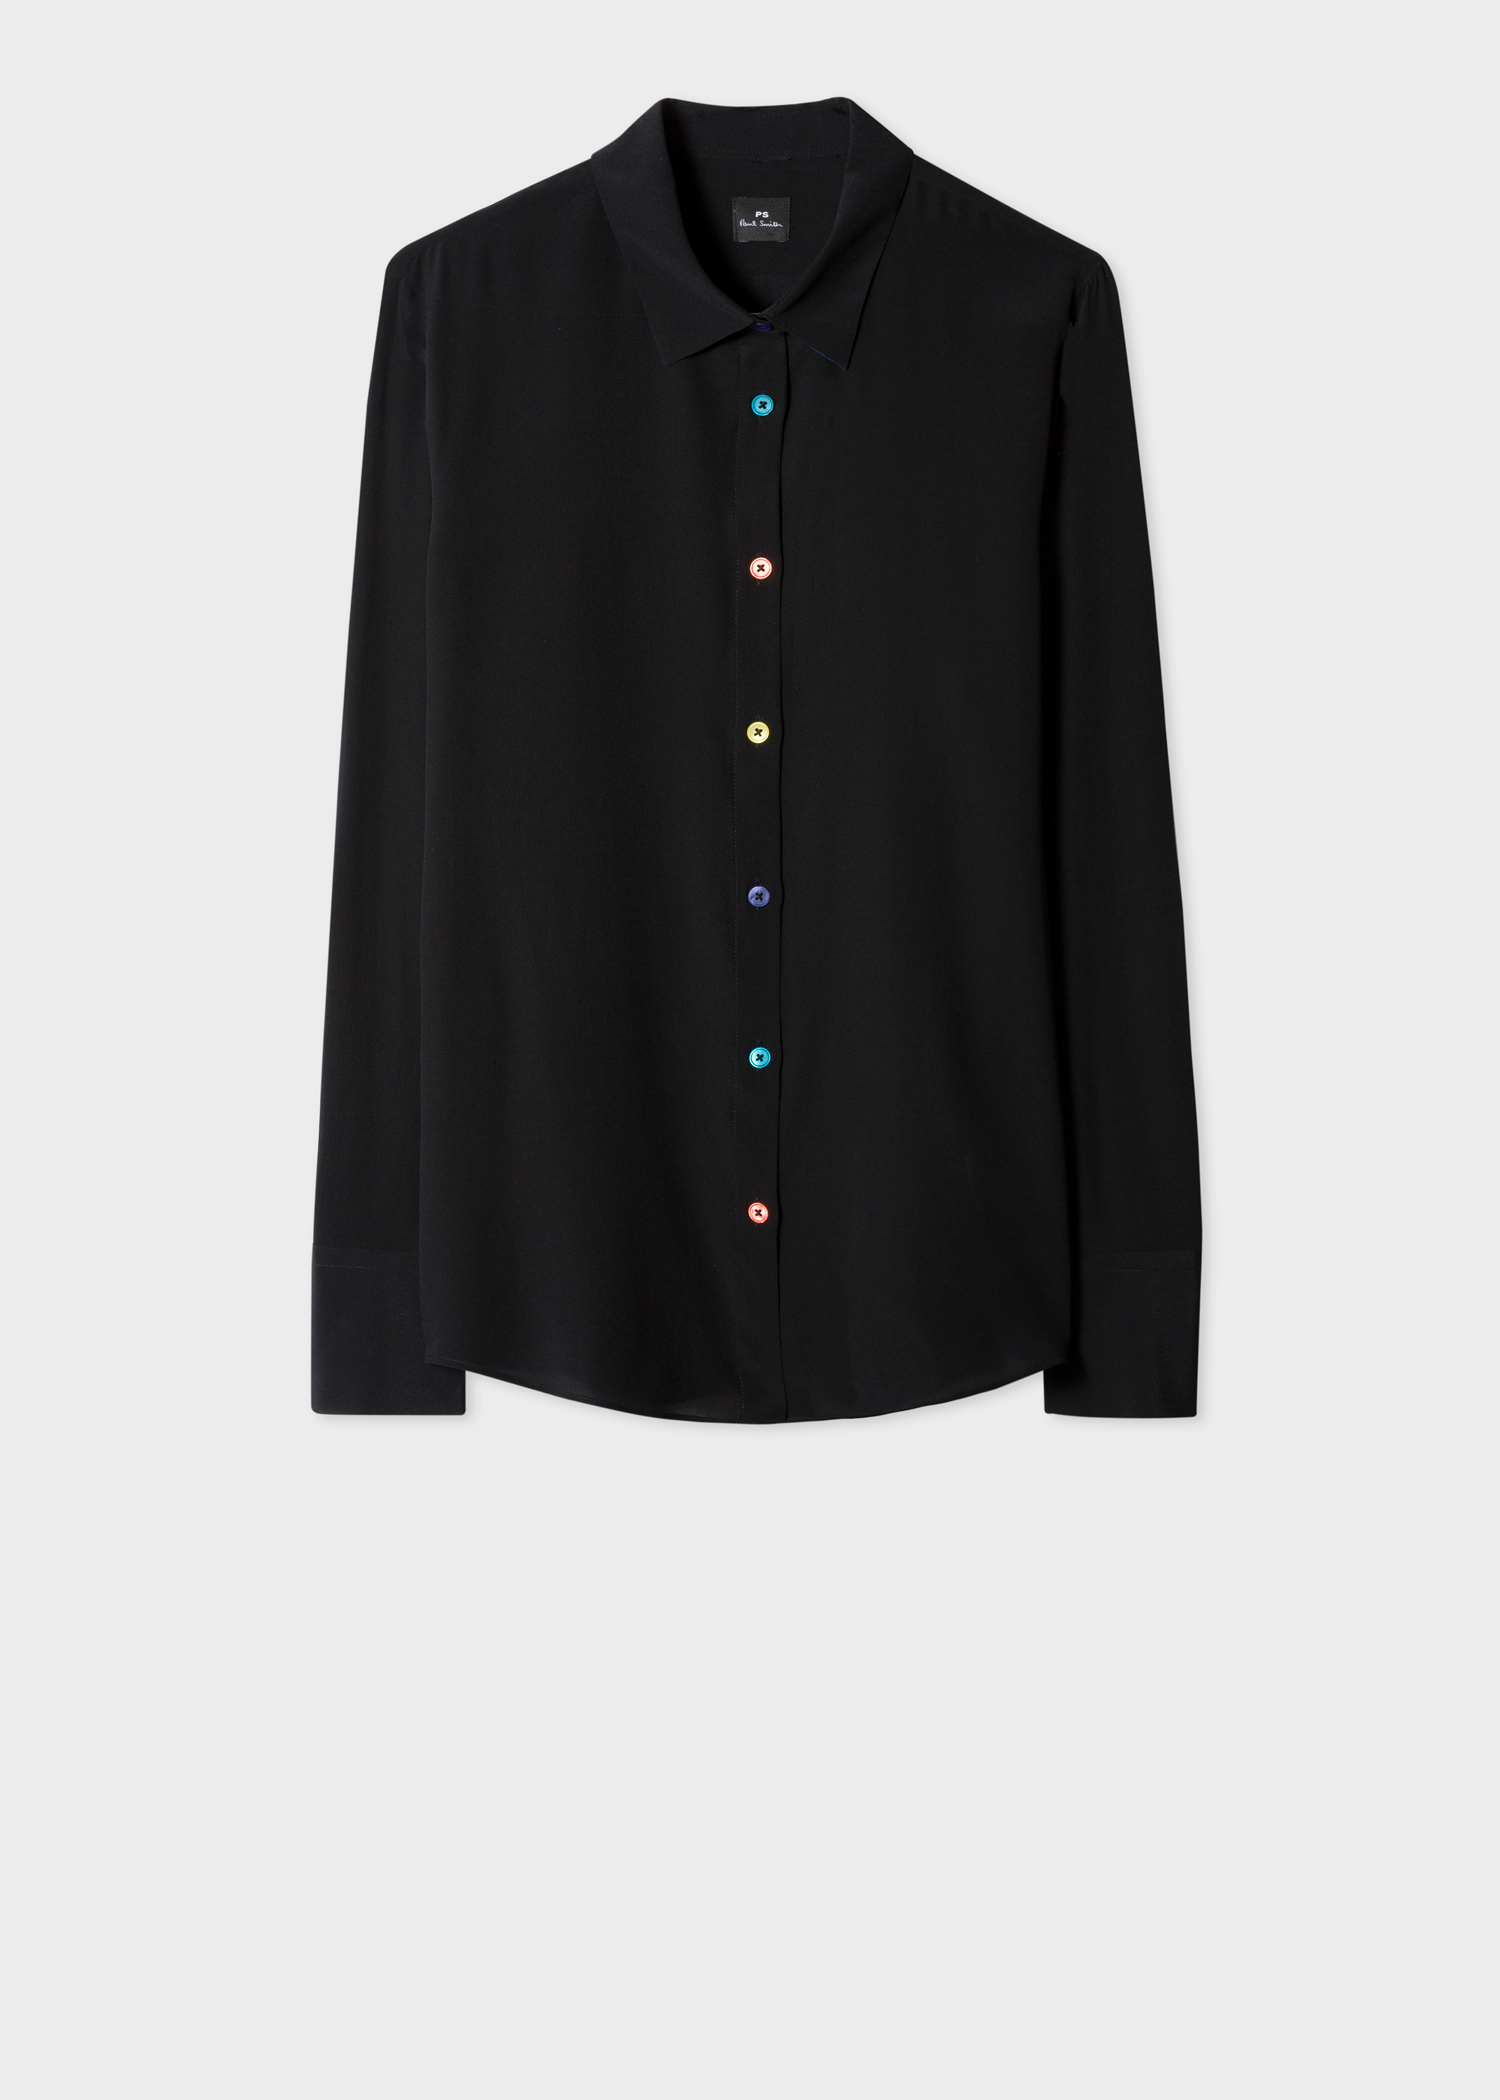 Front view - Women's Black Silk Shirt With Multi-Coloured Button Placket Paul Smith